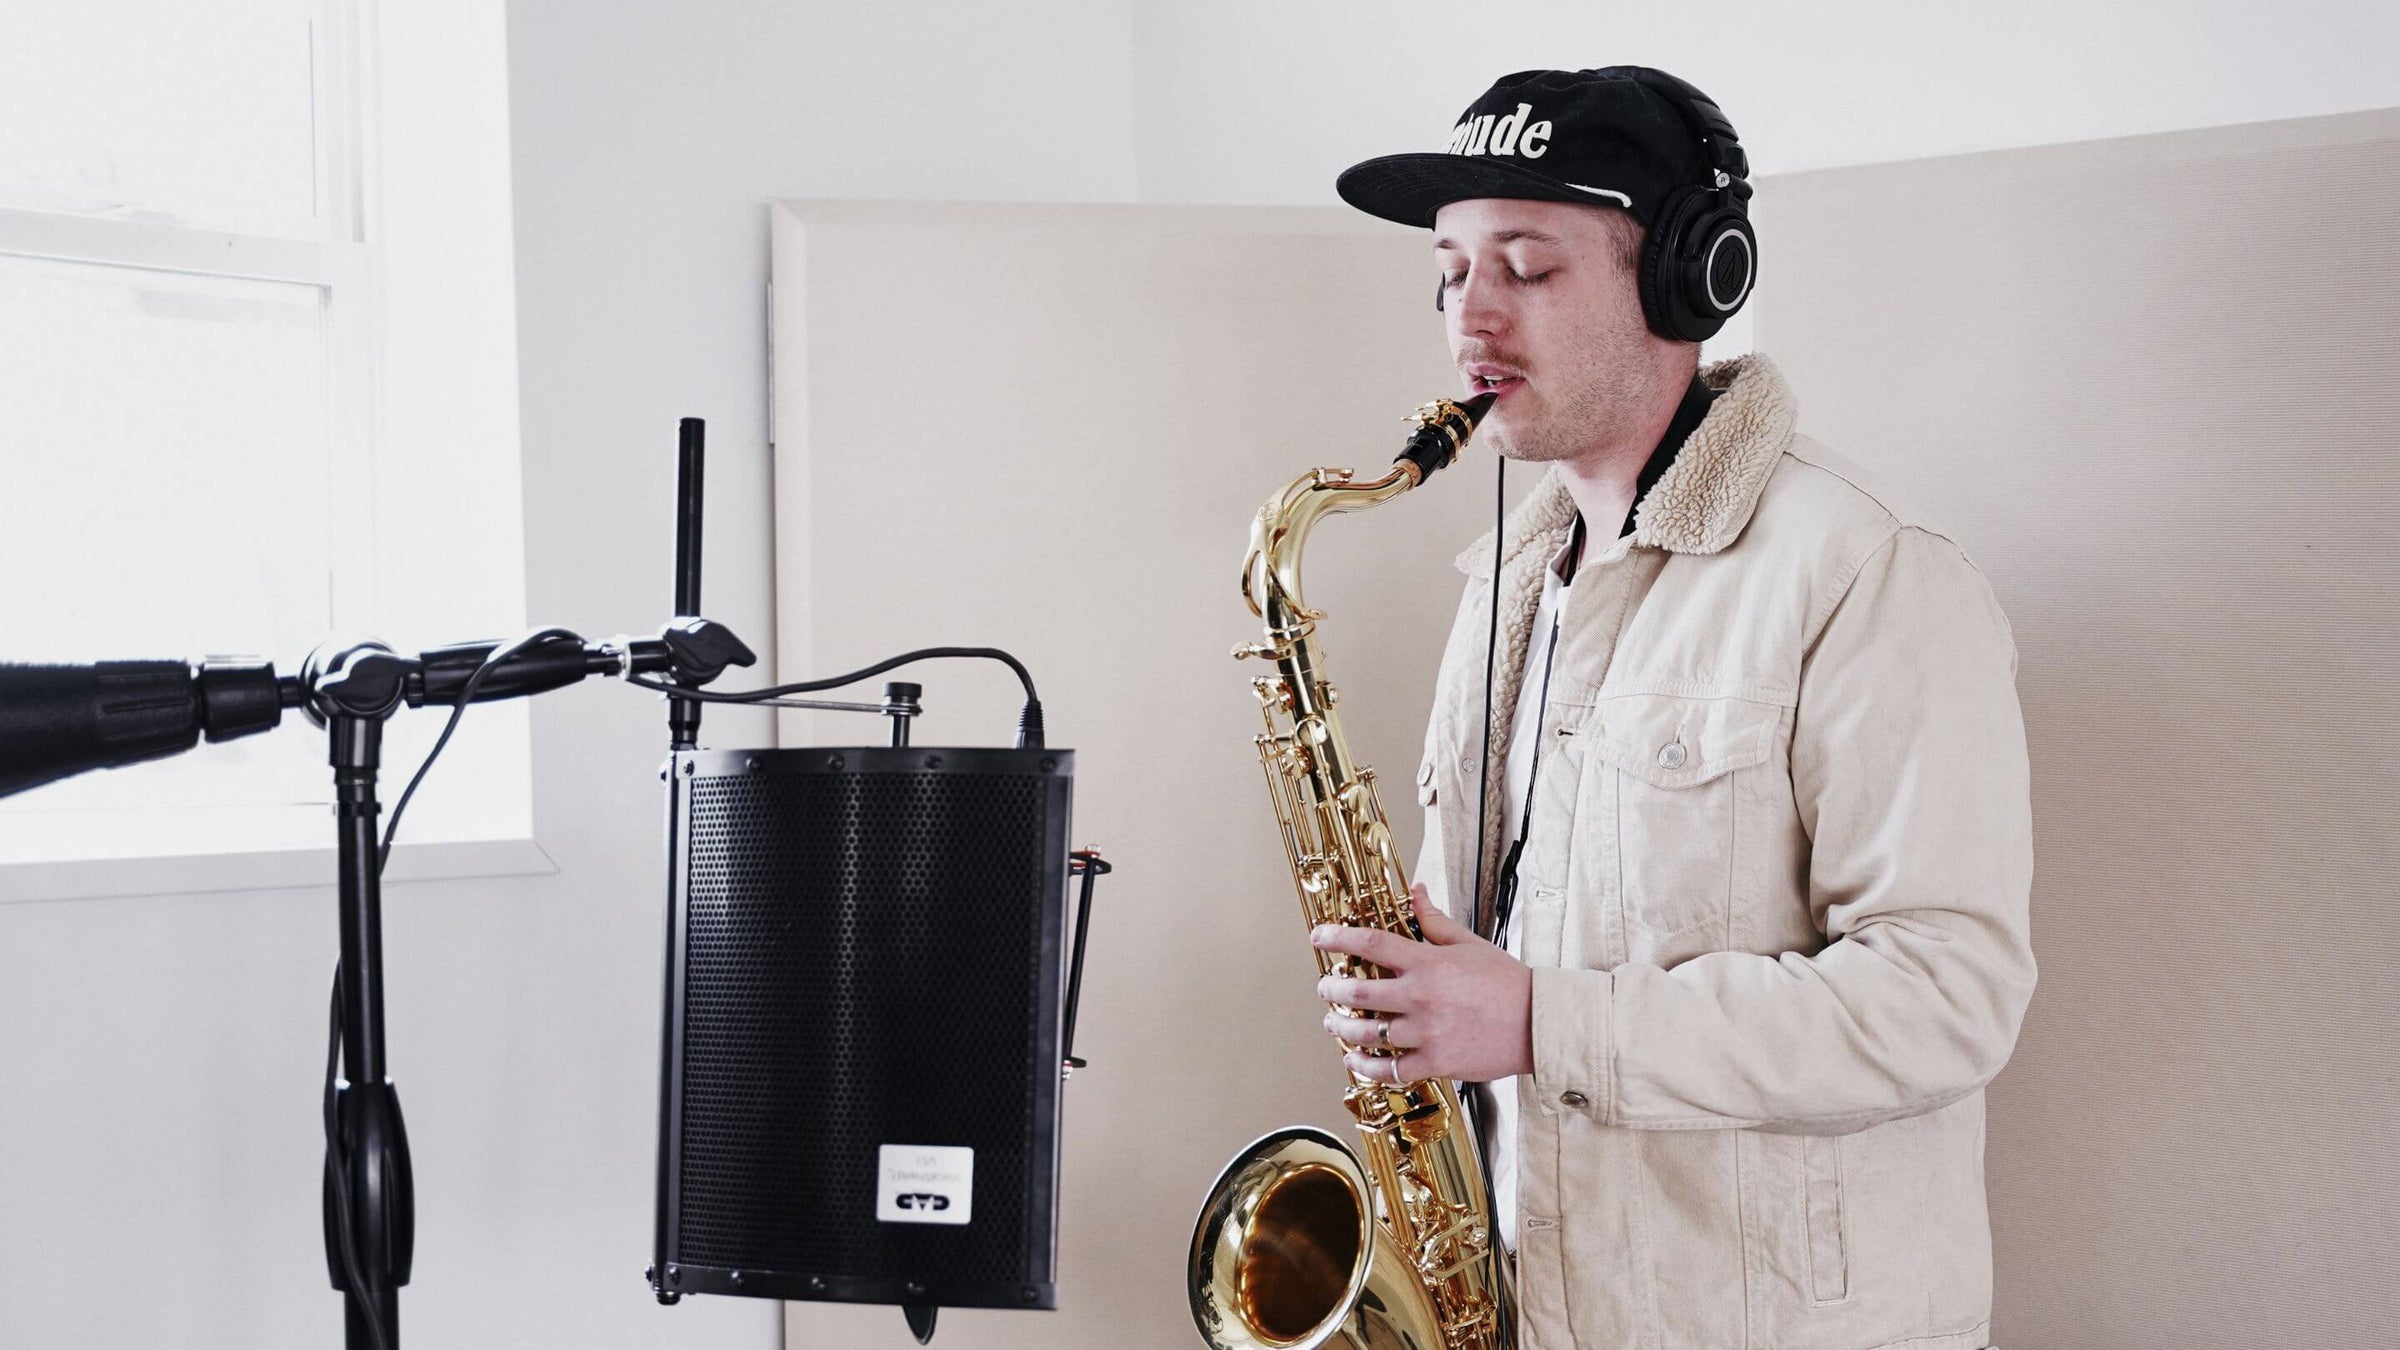 Musician playing saxophone in front of microphone.